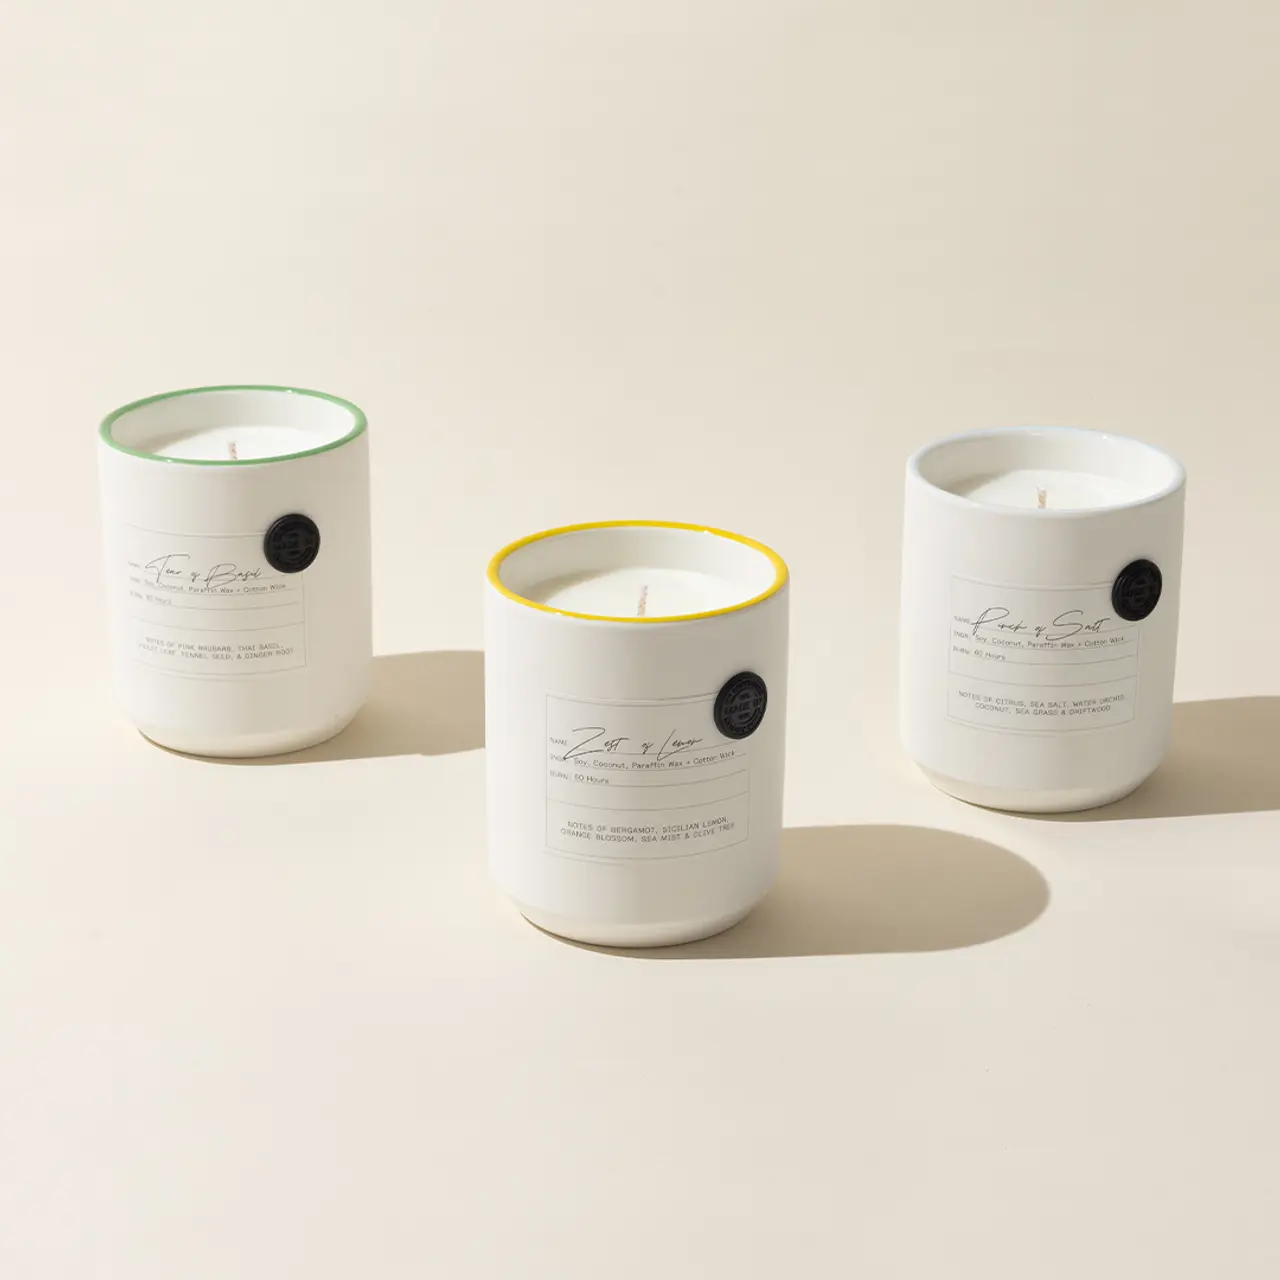 Three scented candles with labels are neatly positioned side by side on a light background, one of which has a distinct yellow rim.